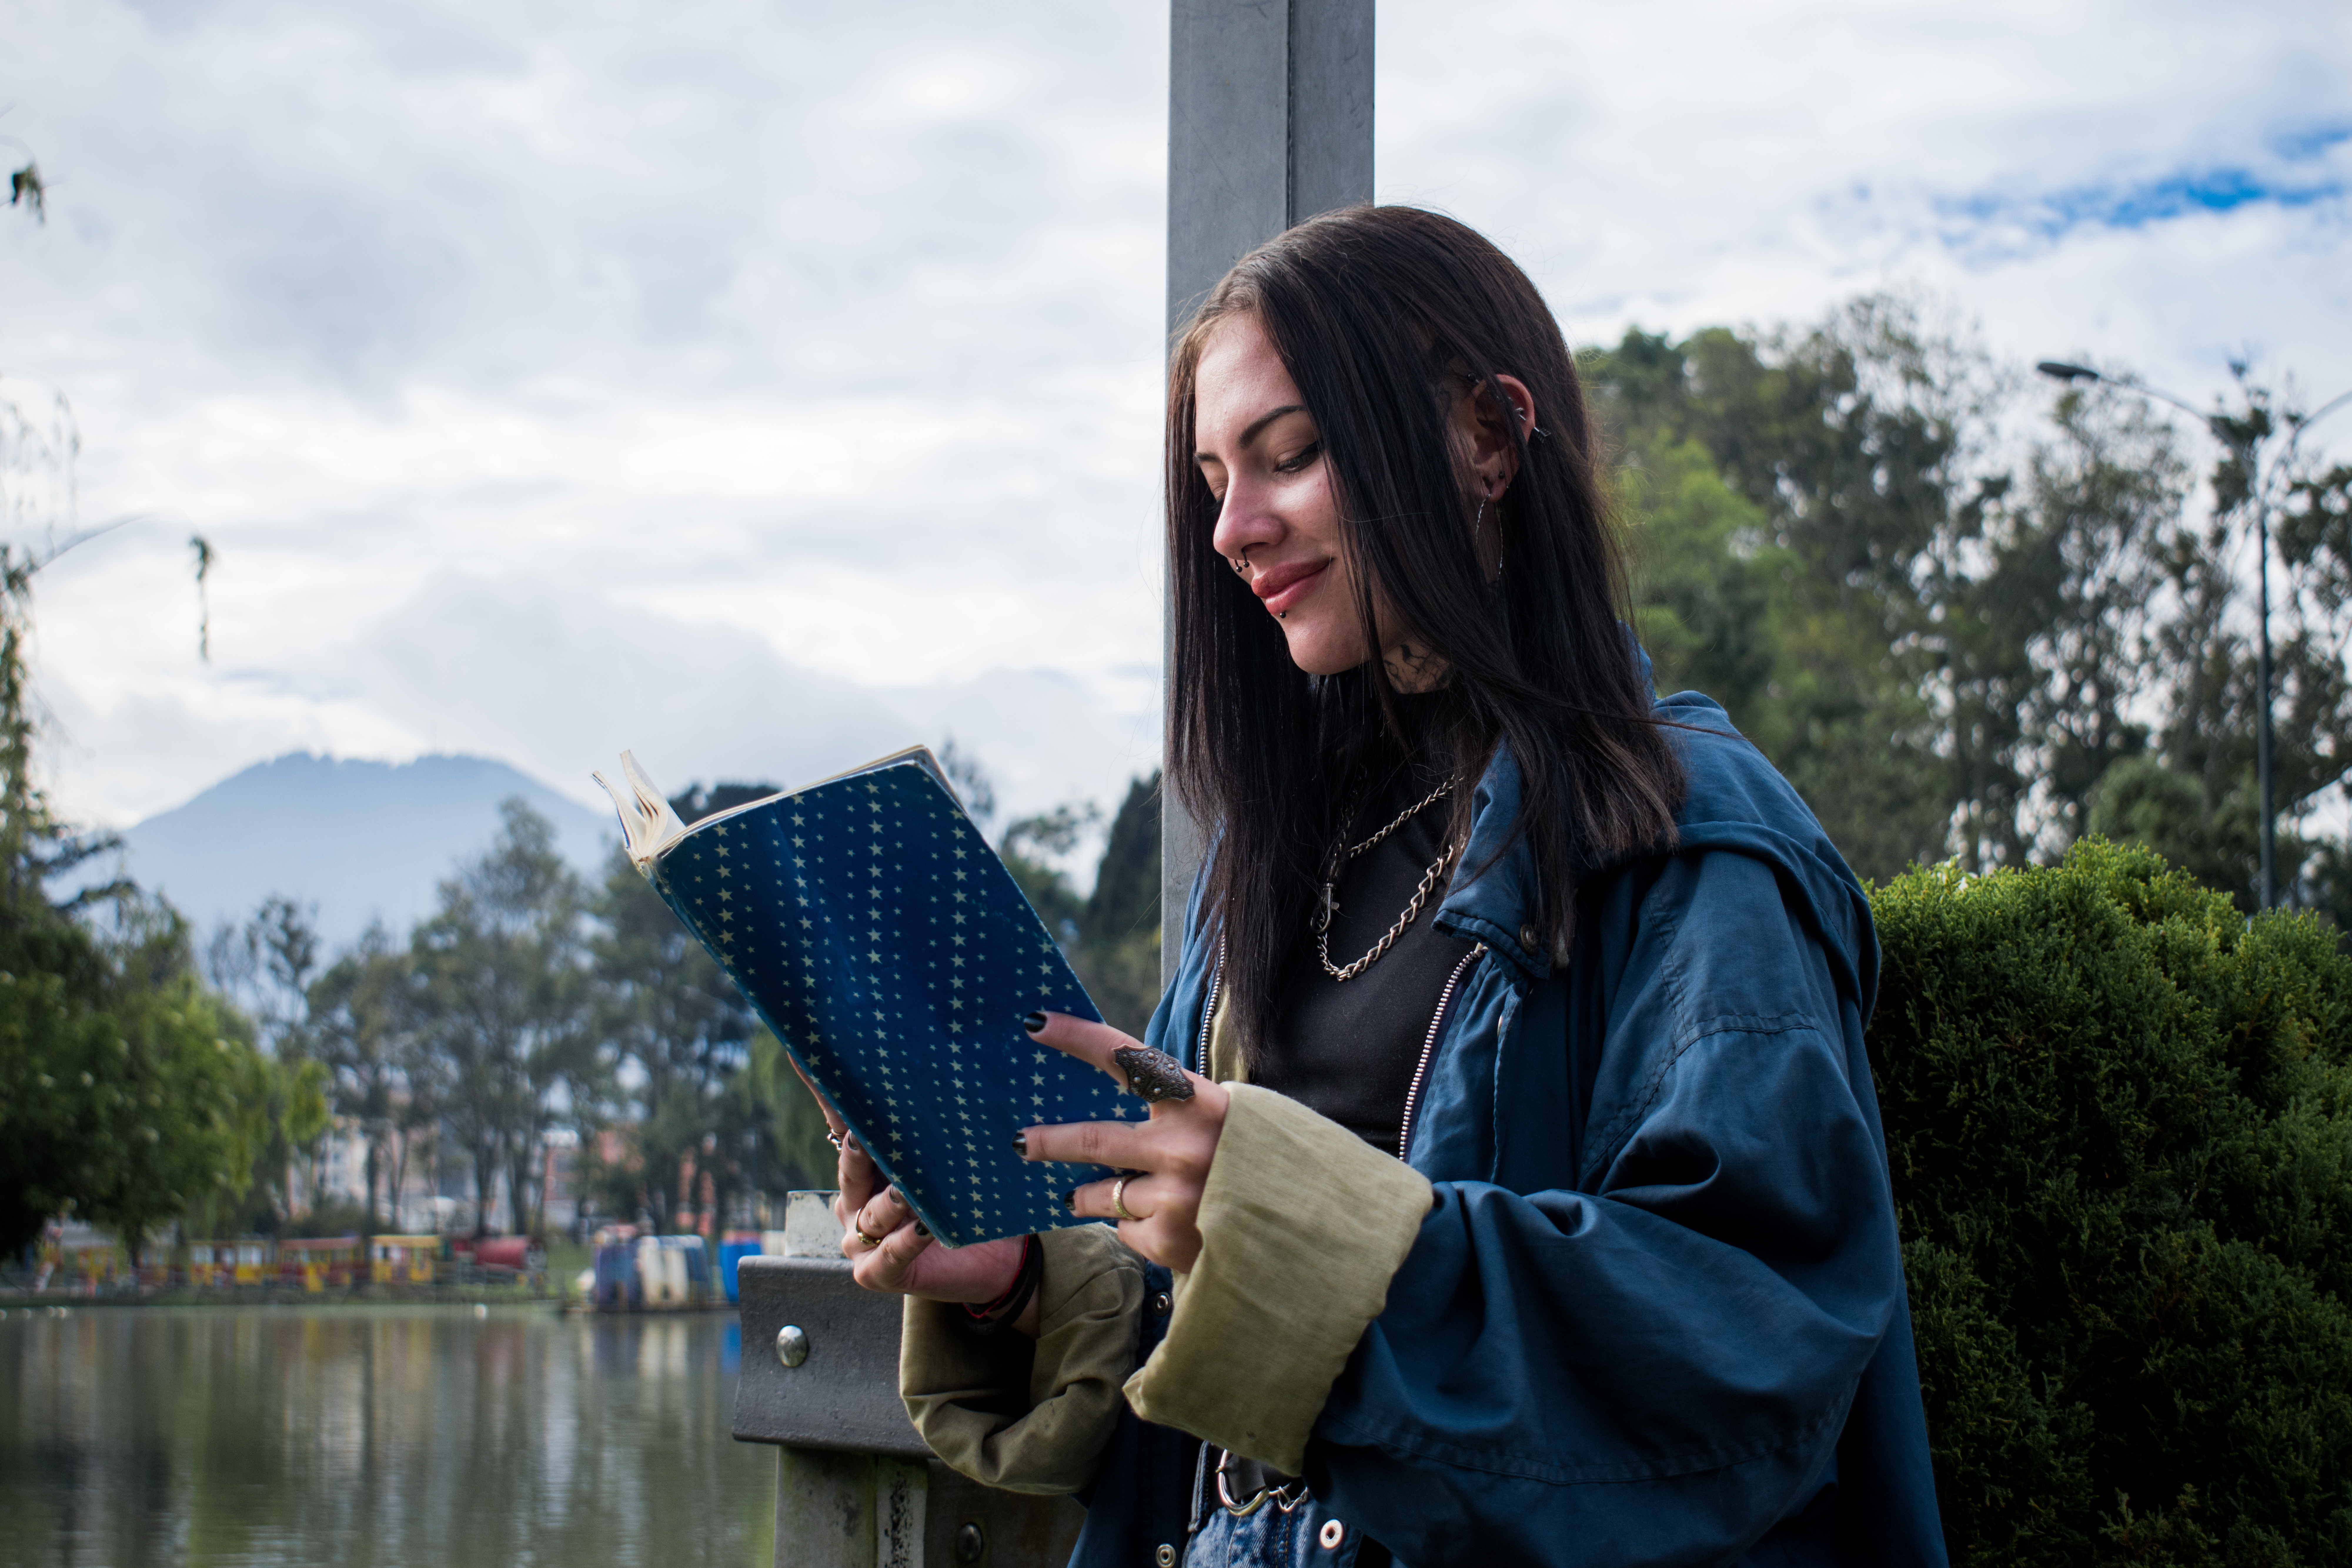 Young woman dressed in blue reading a book next to the lake.